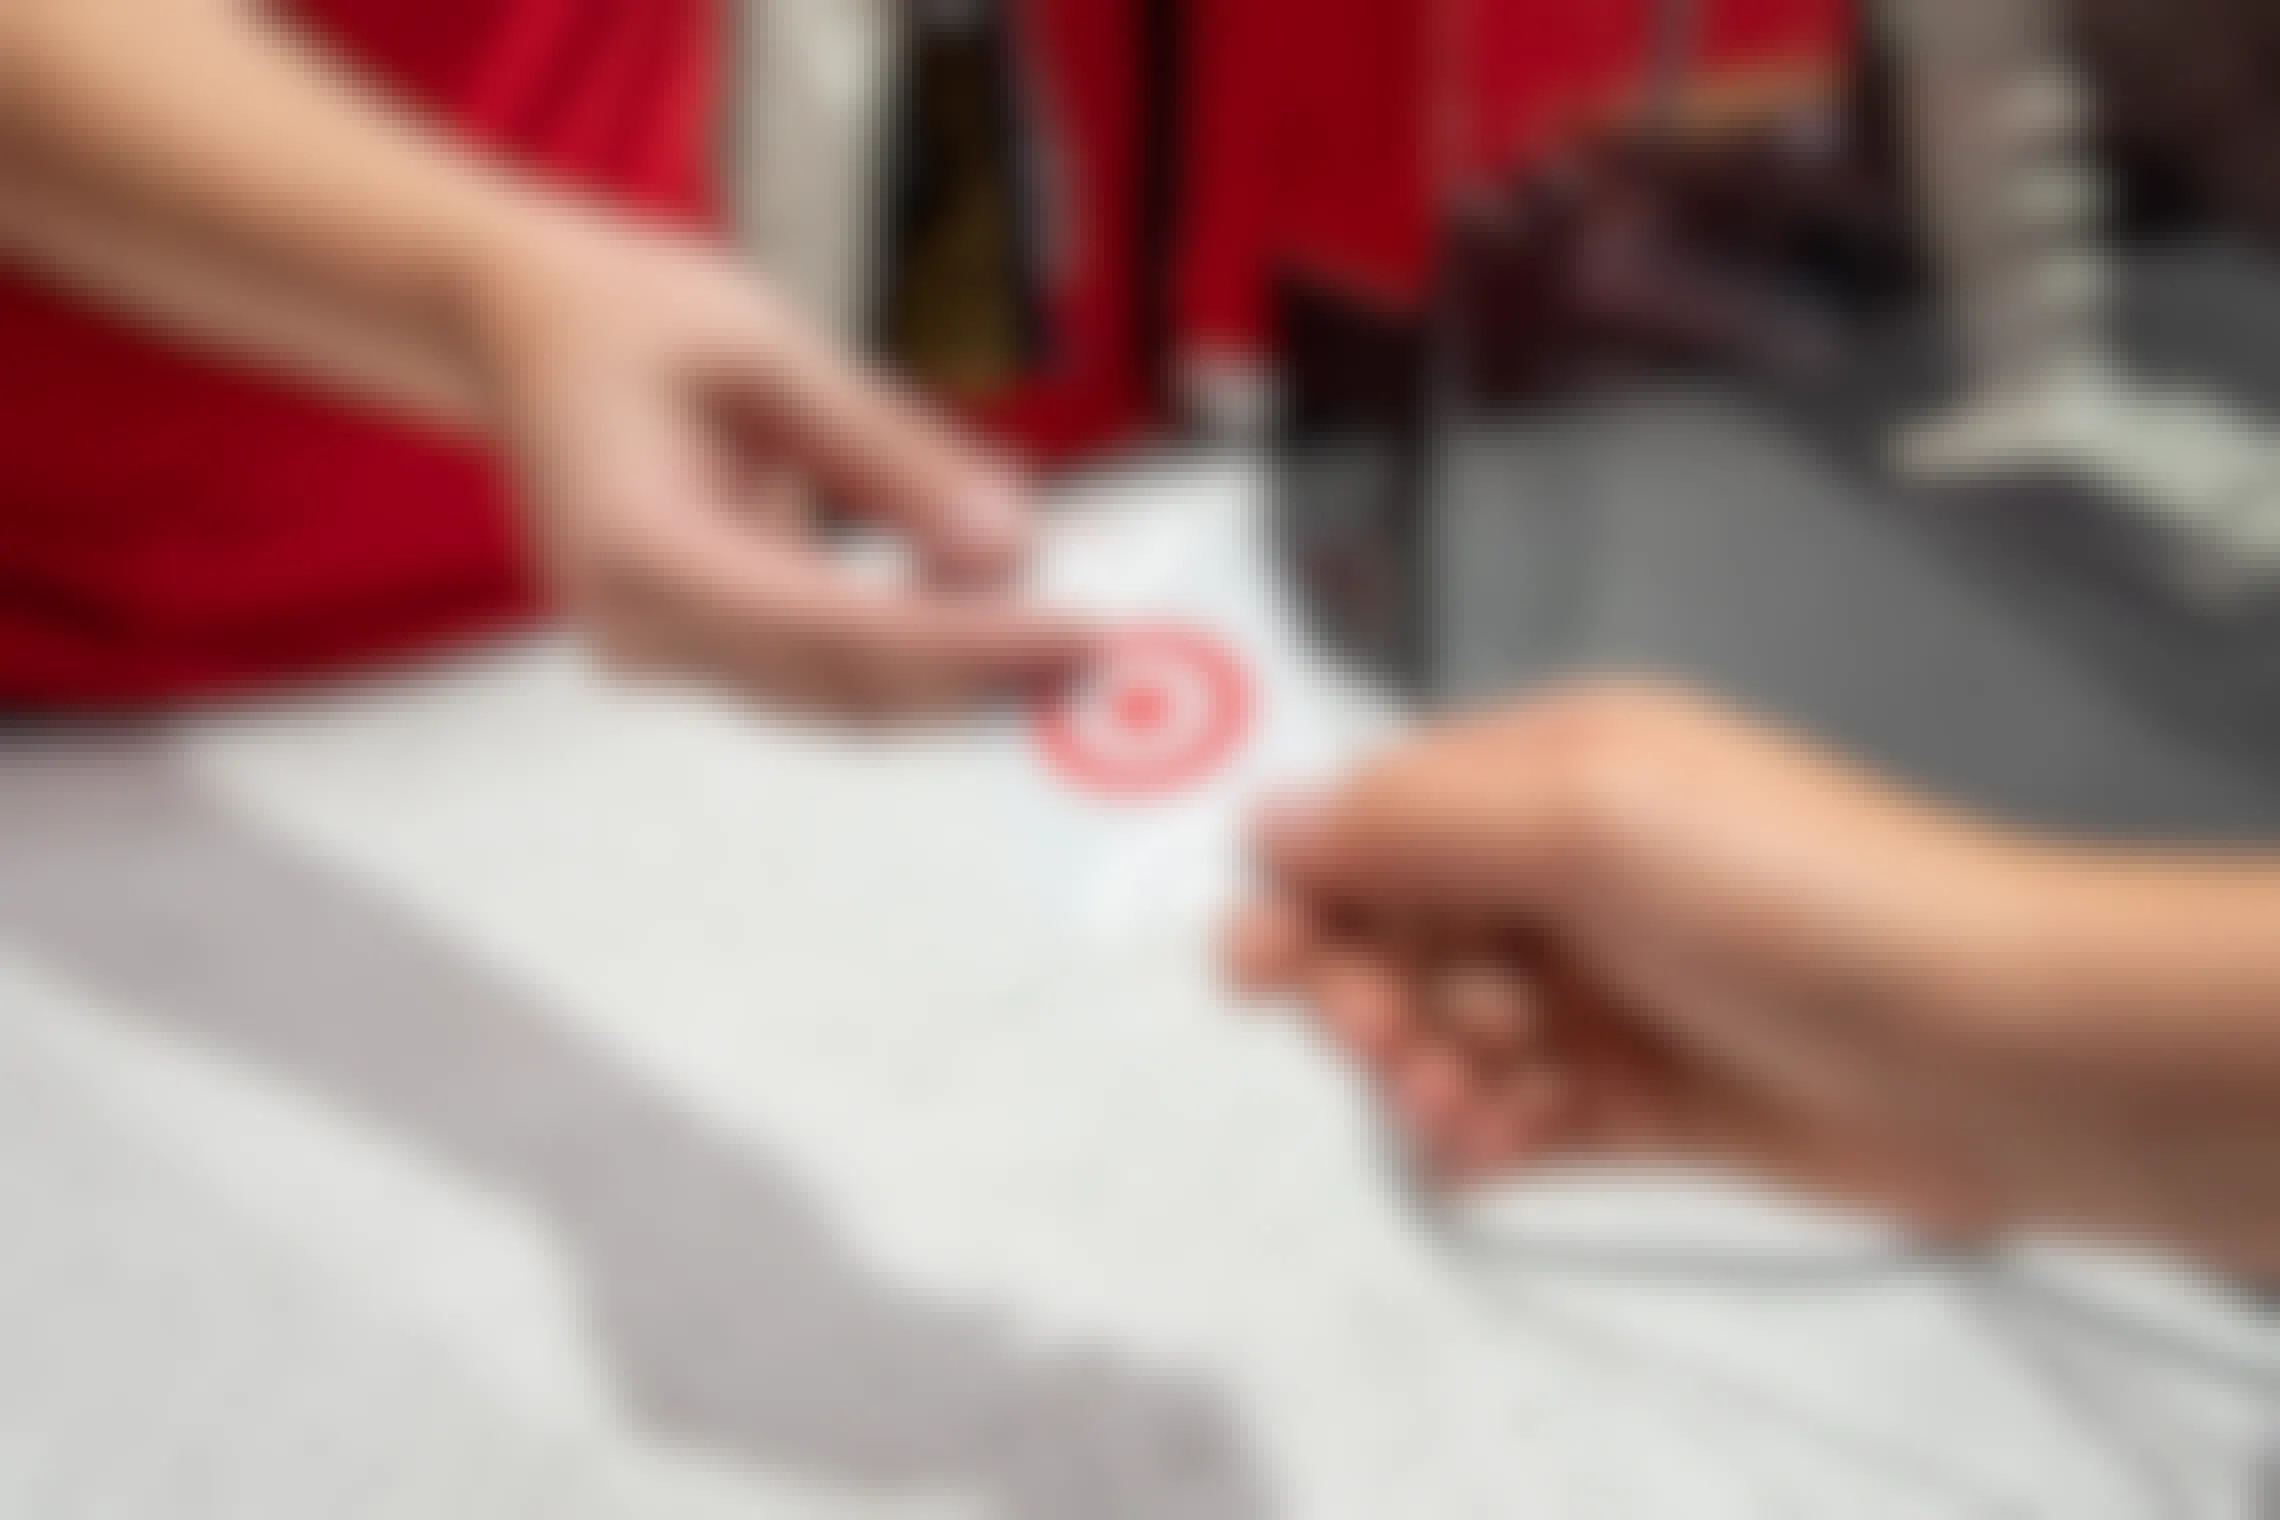 A Target employee handing someone a Target gift card at the register.